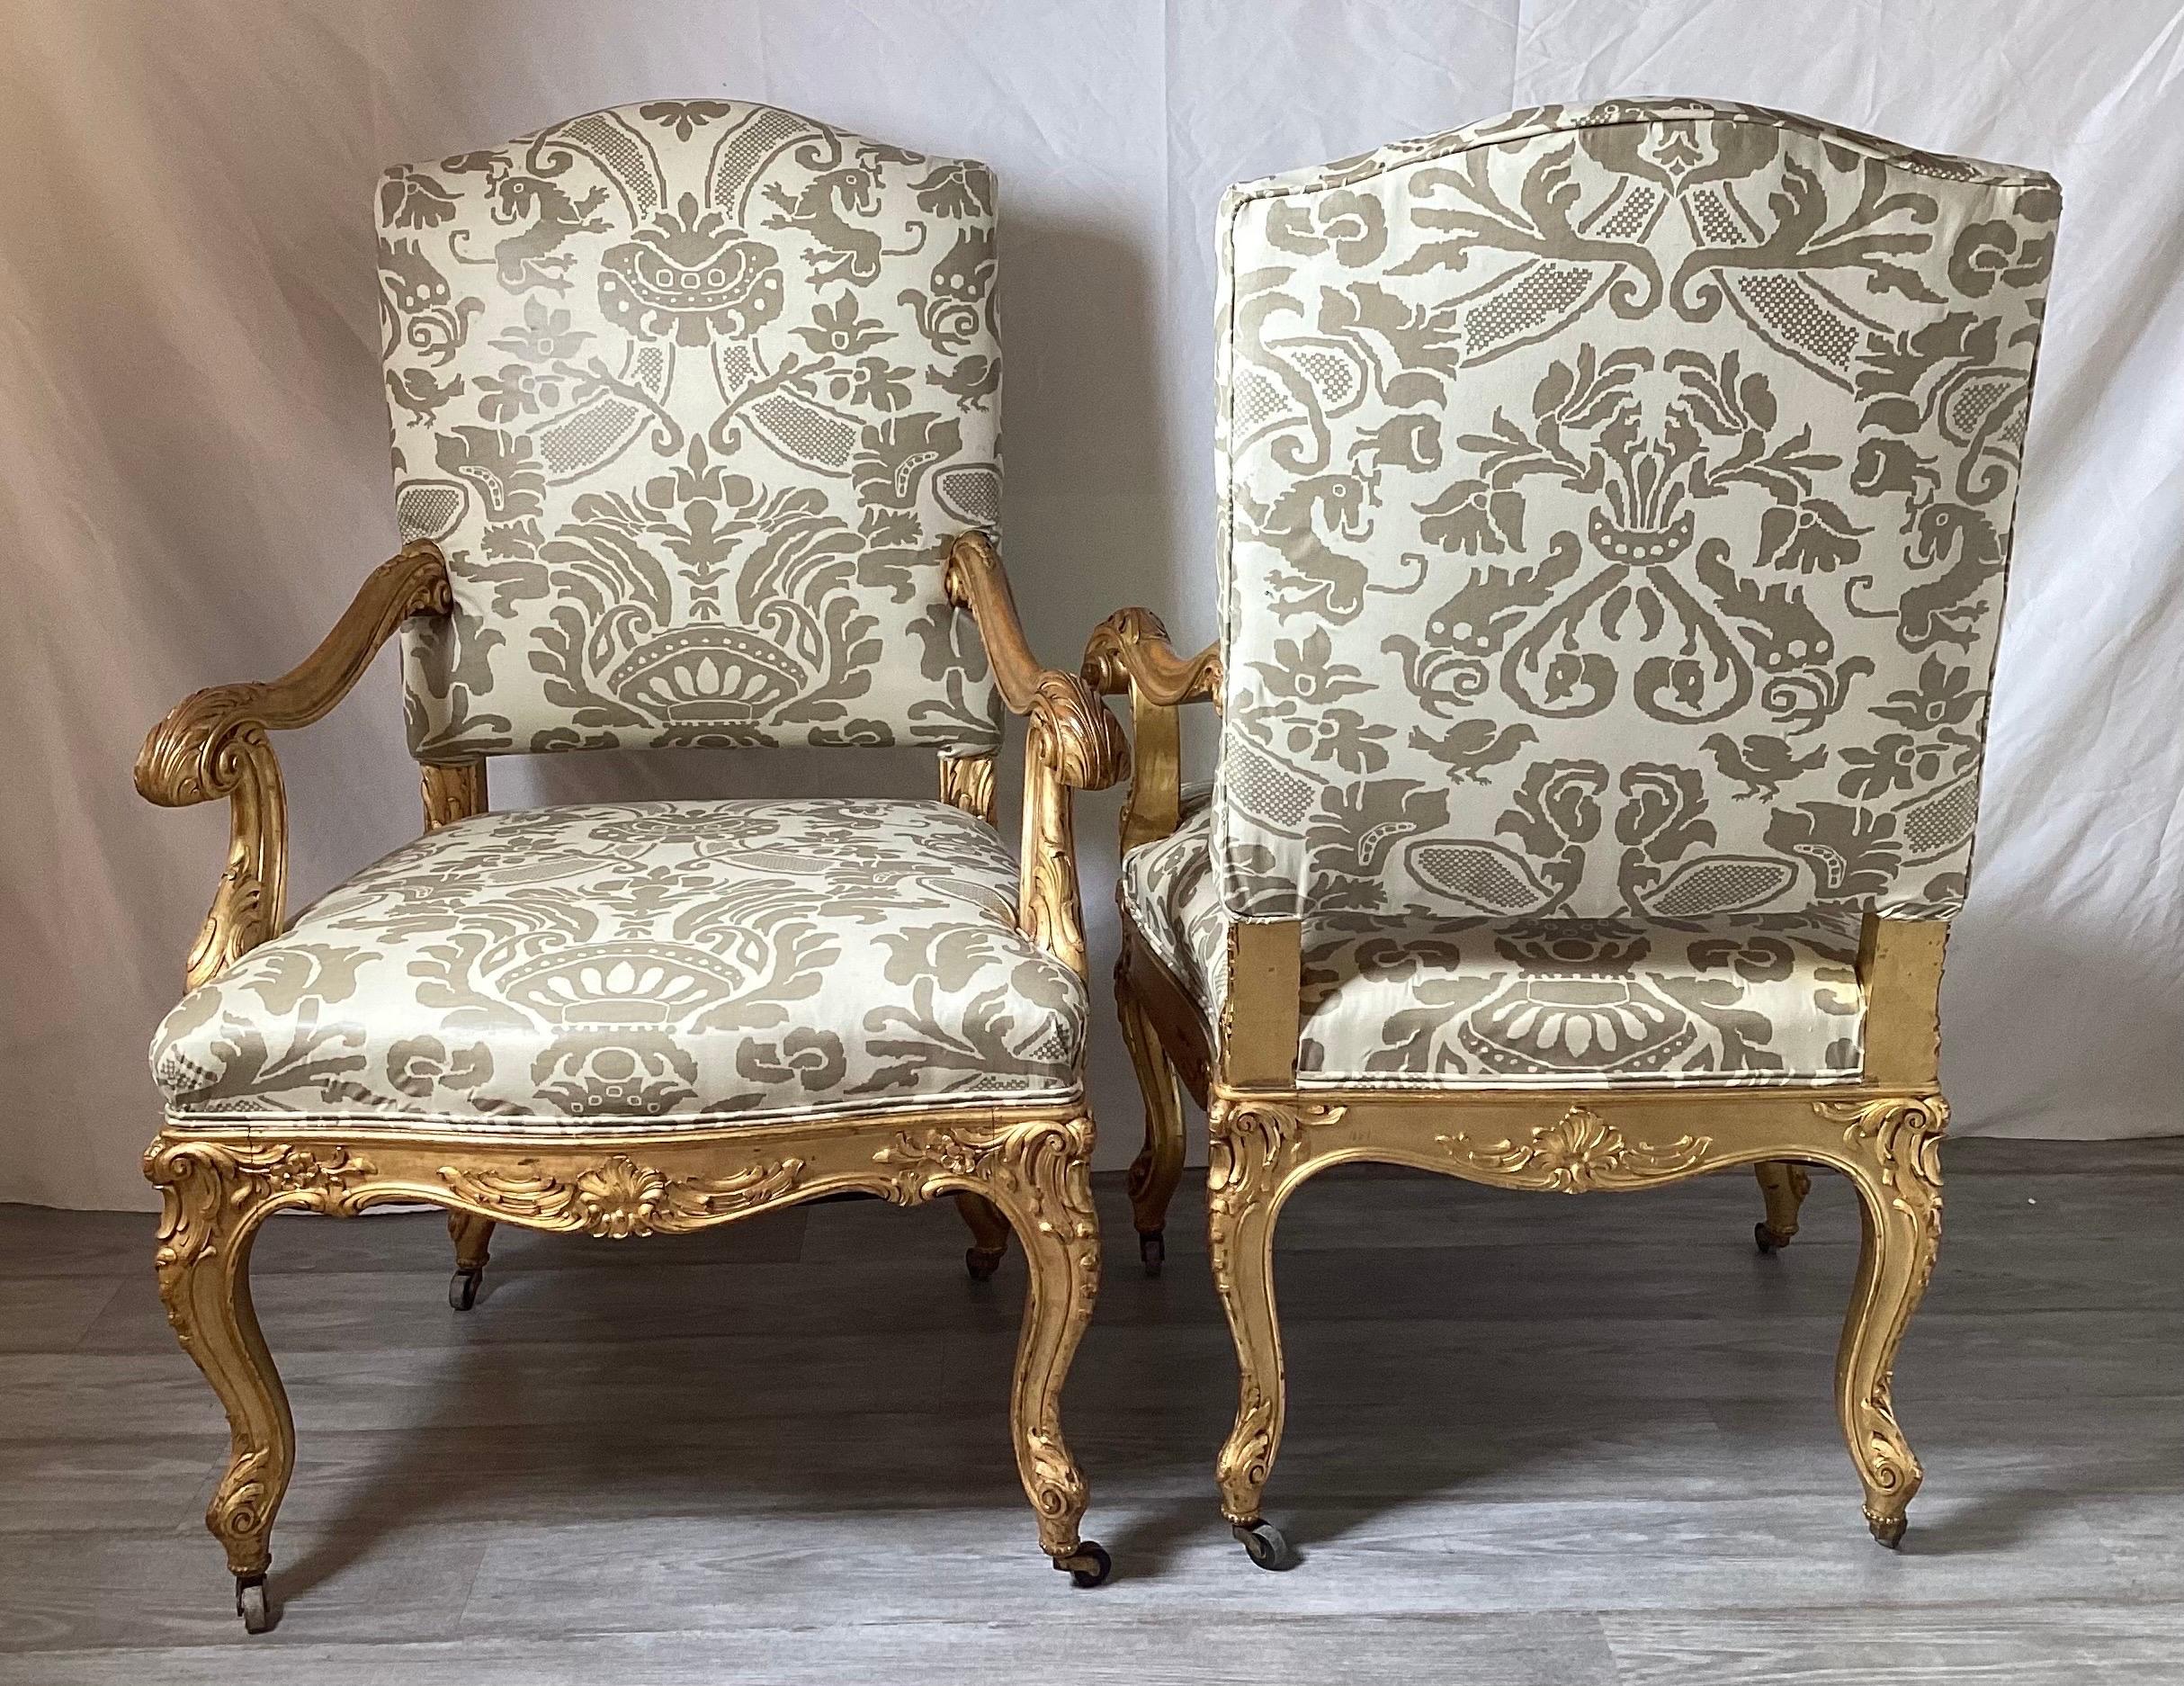 French Pair of 19th Century Giltwood Fauteuils Upholstered Chairs For Sale